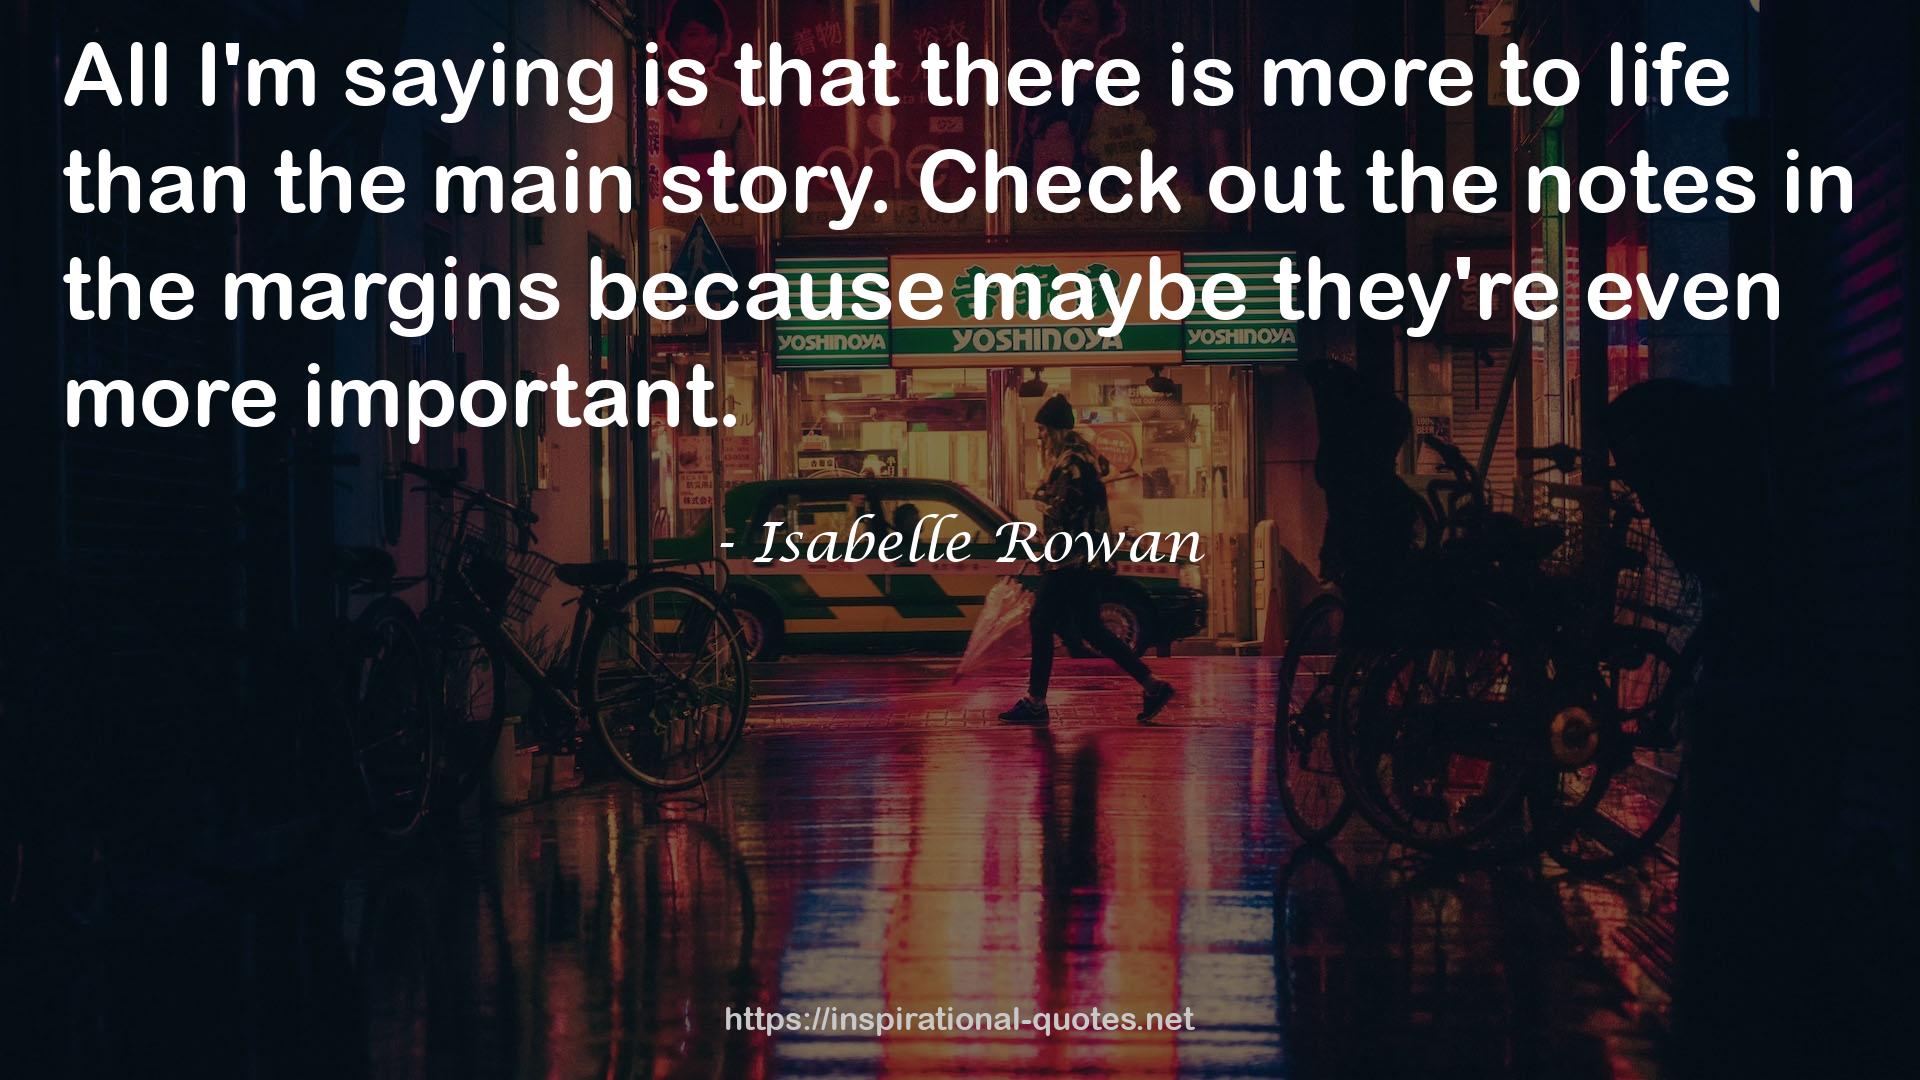 Isabelle Rowan QUOTES